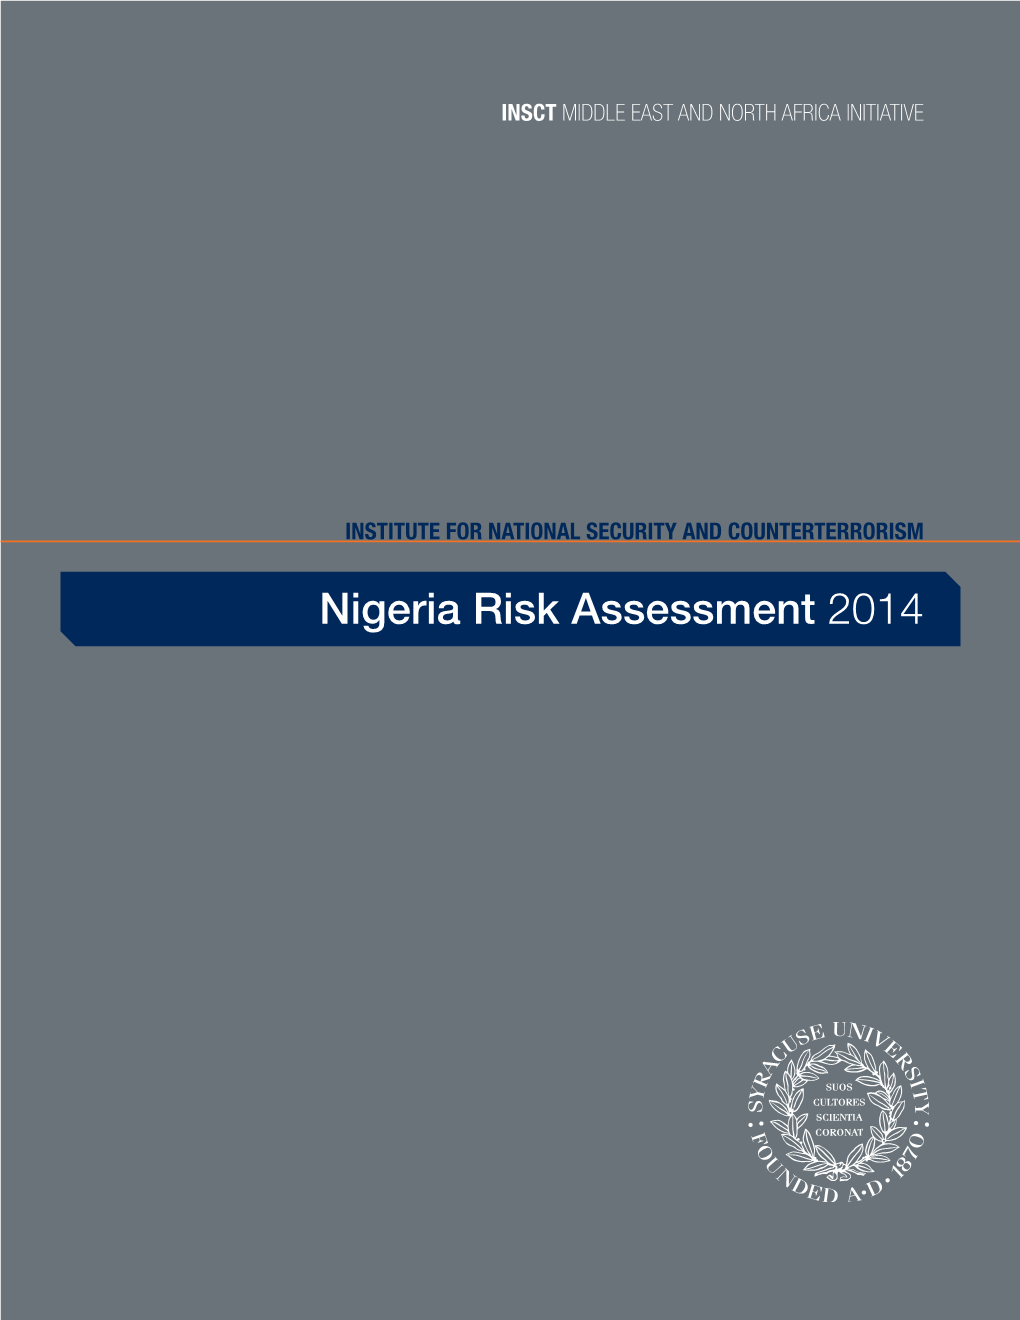 Nigeria Risk Assessment 2014 INSCT MIDDLE EAST and NORTH AFRICA INITIATIVE